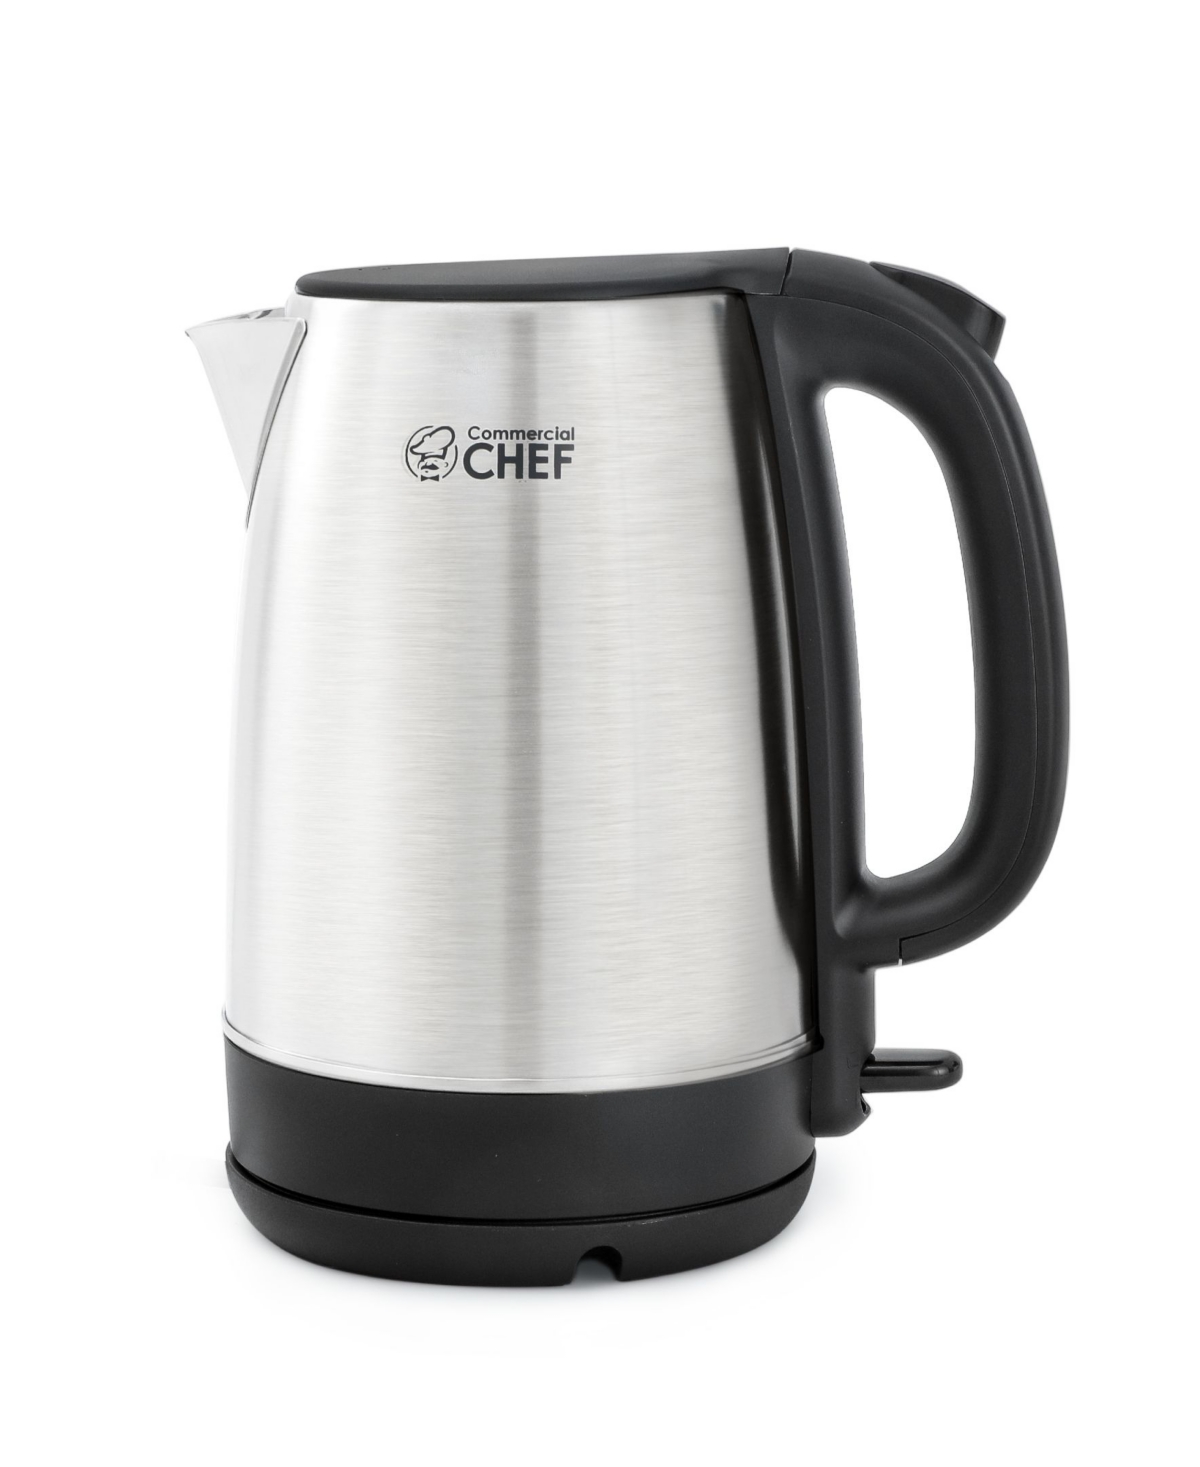 Comm Chef Cordless Kettle